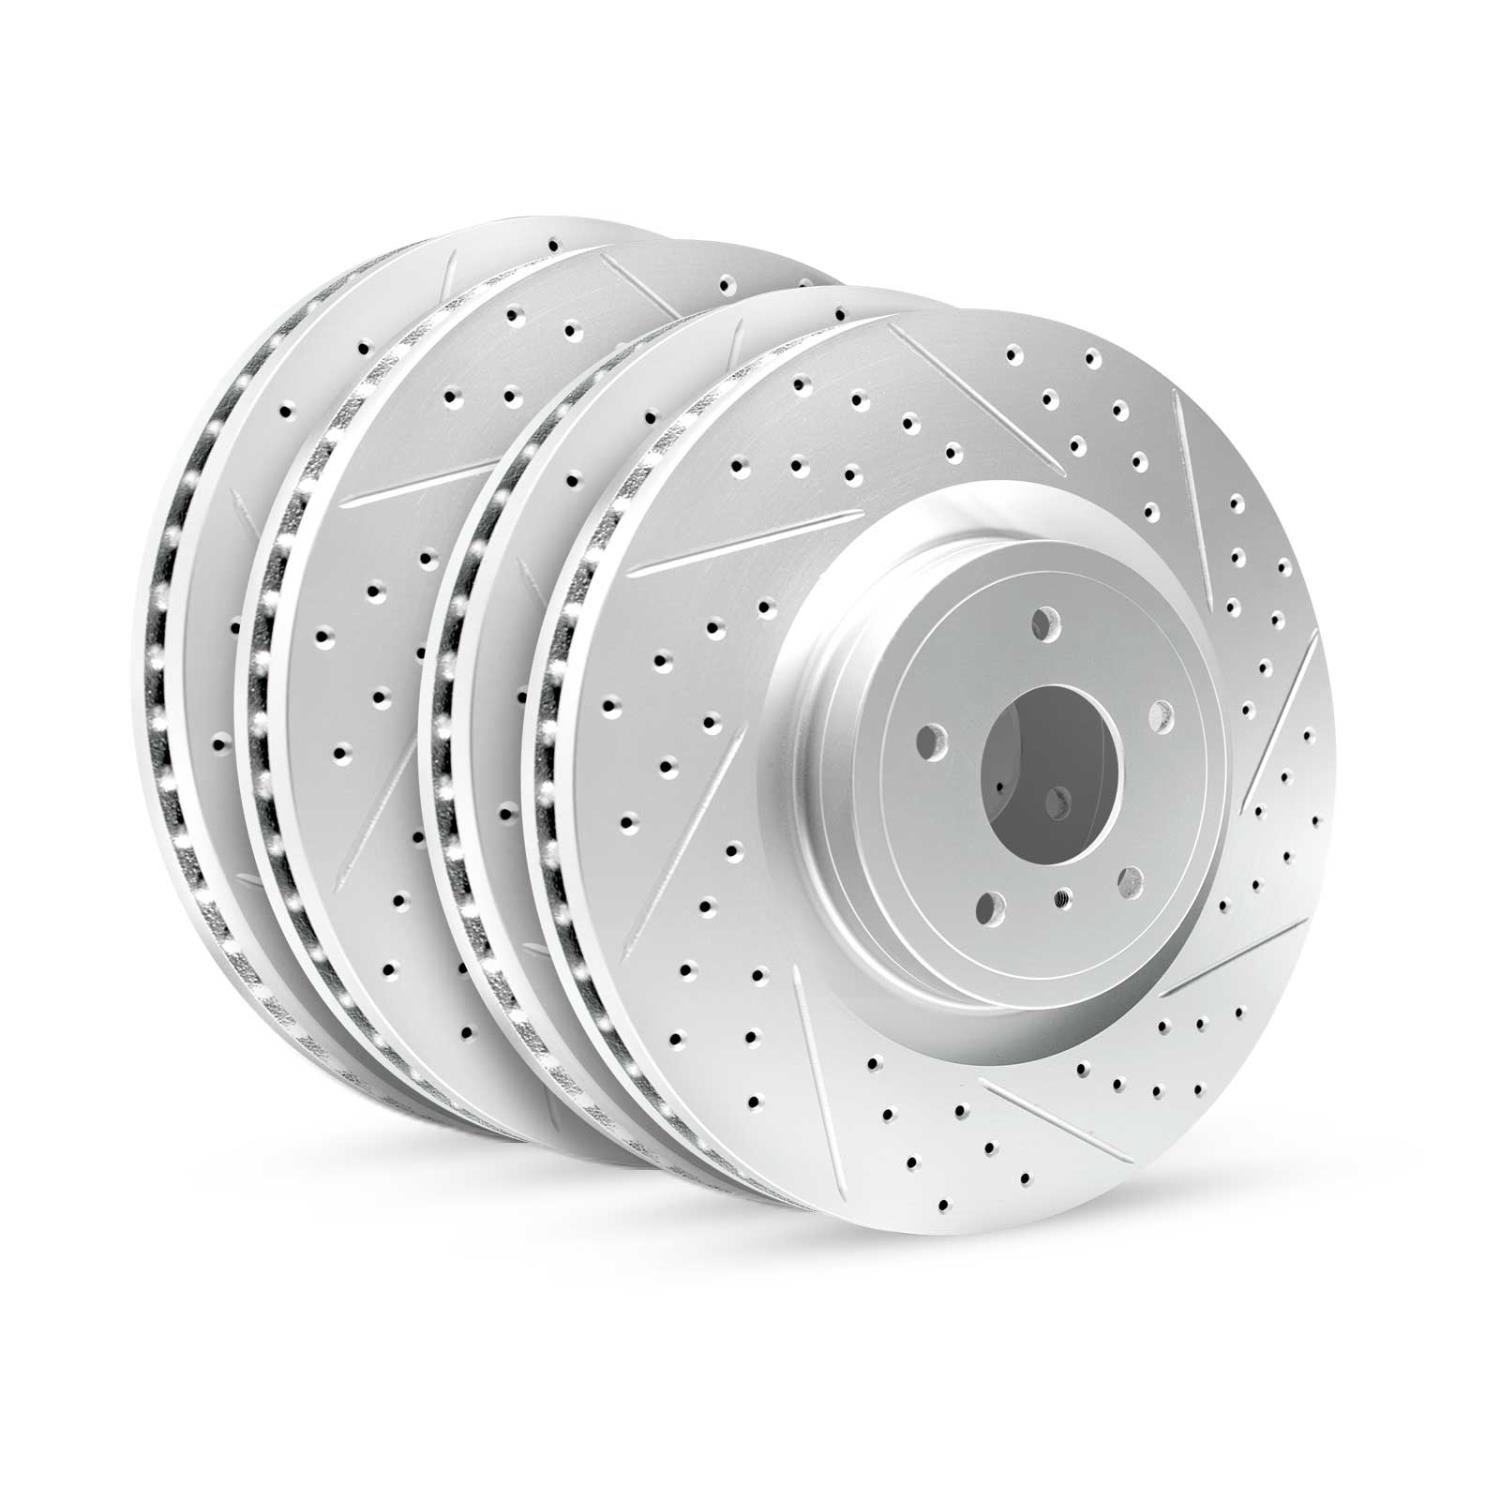 GEO-Carbon Drilled/Slotted Rotors, 2016-2018 BMW, Position: Front/Rear